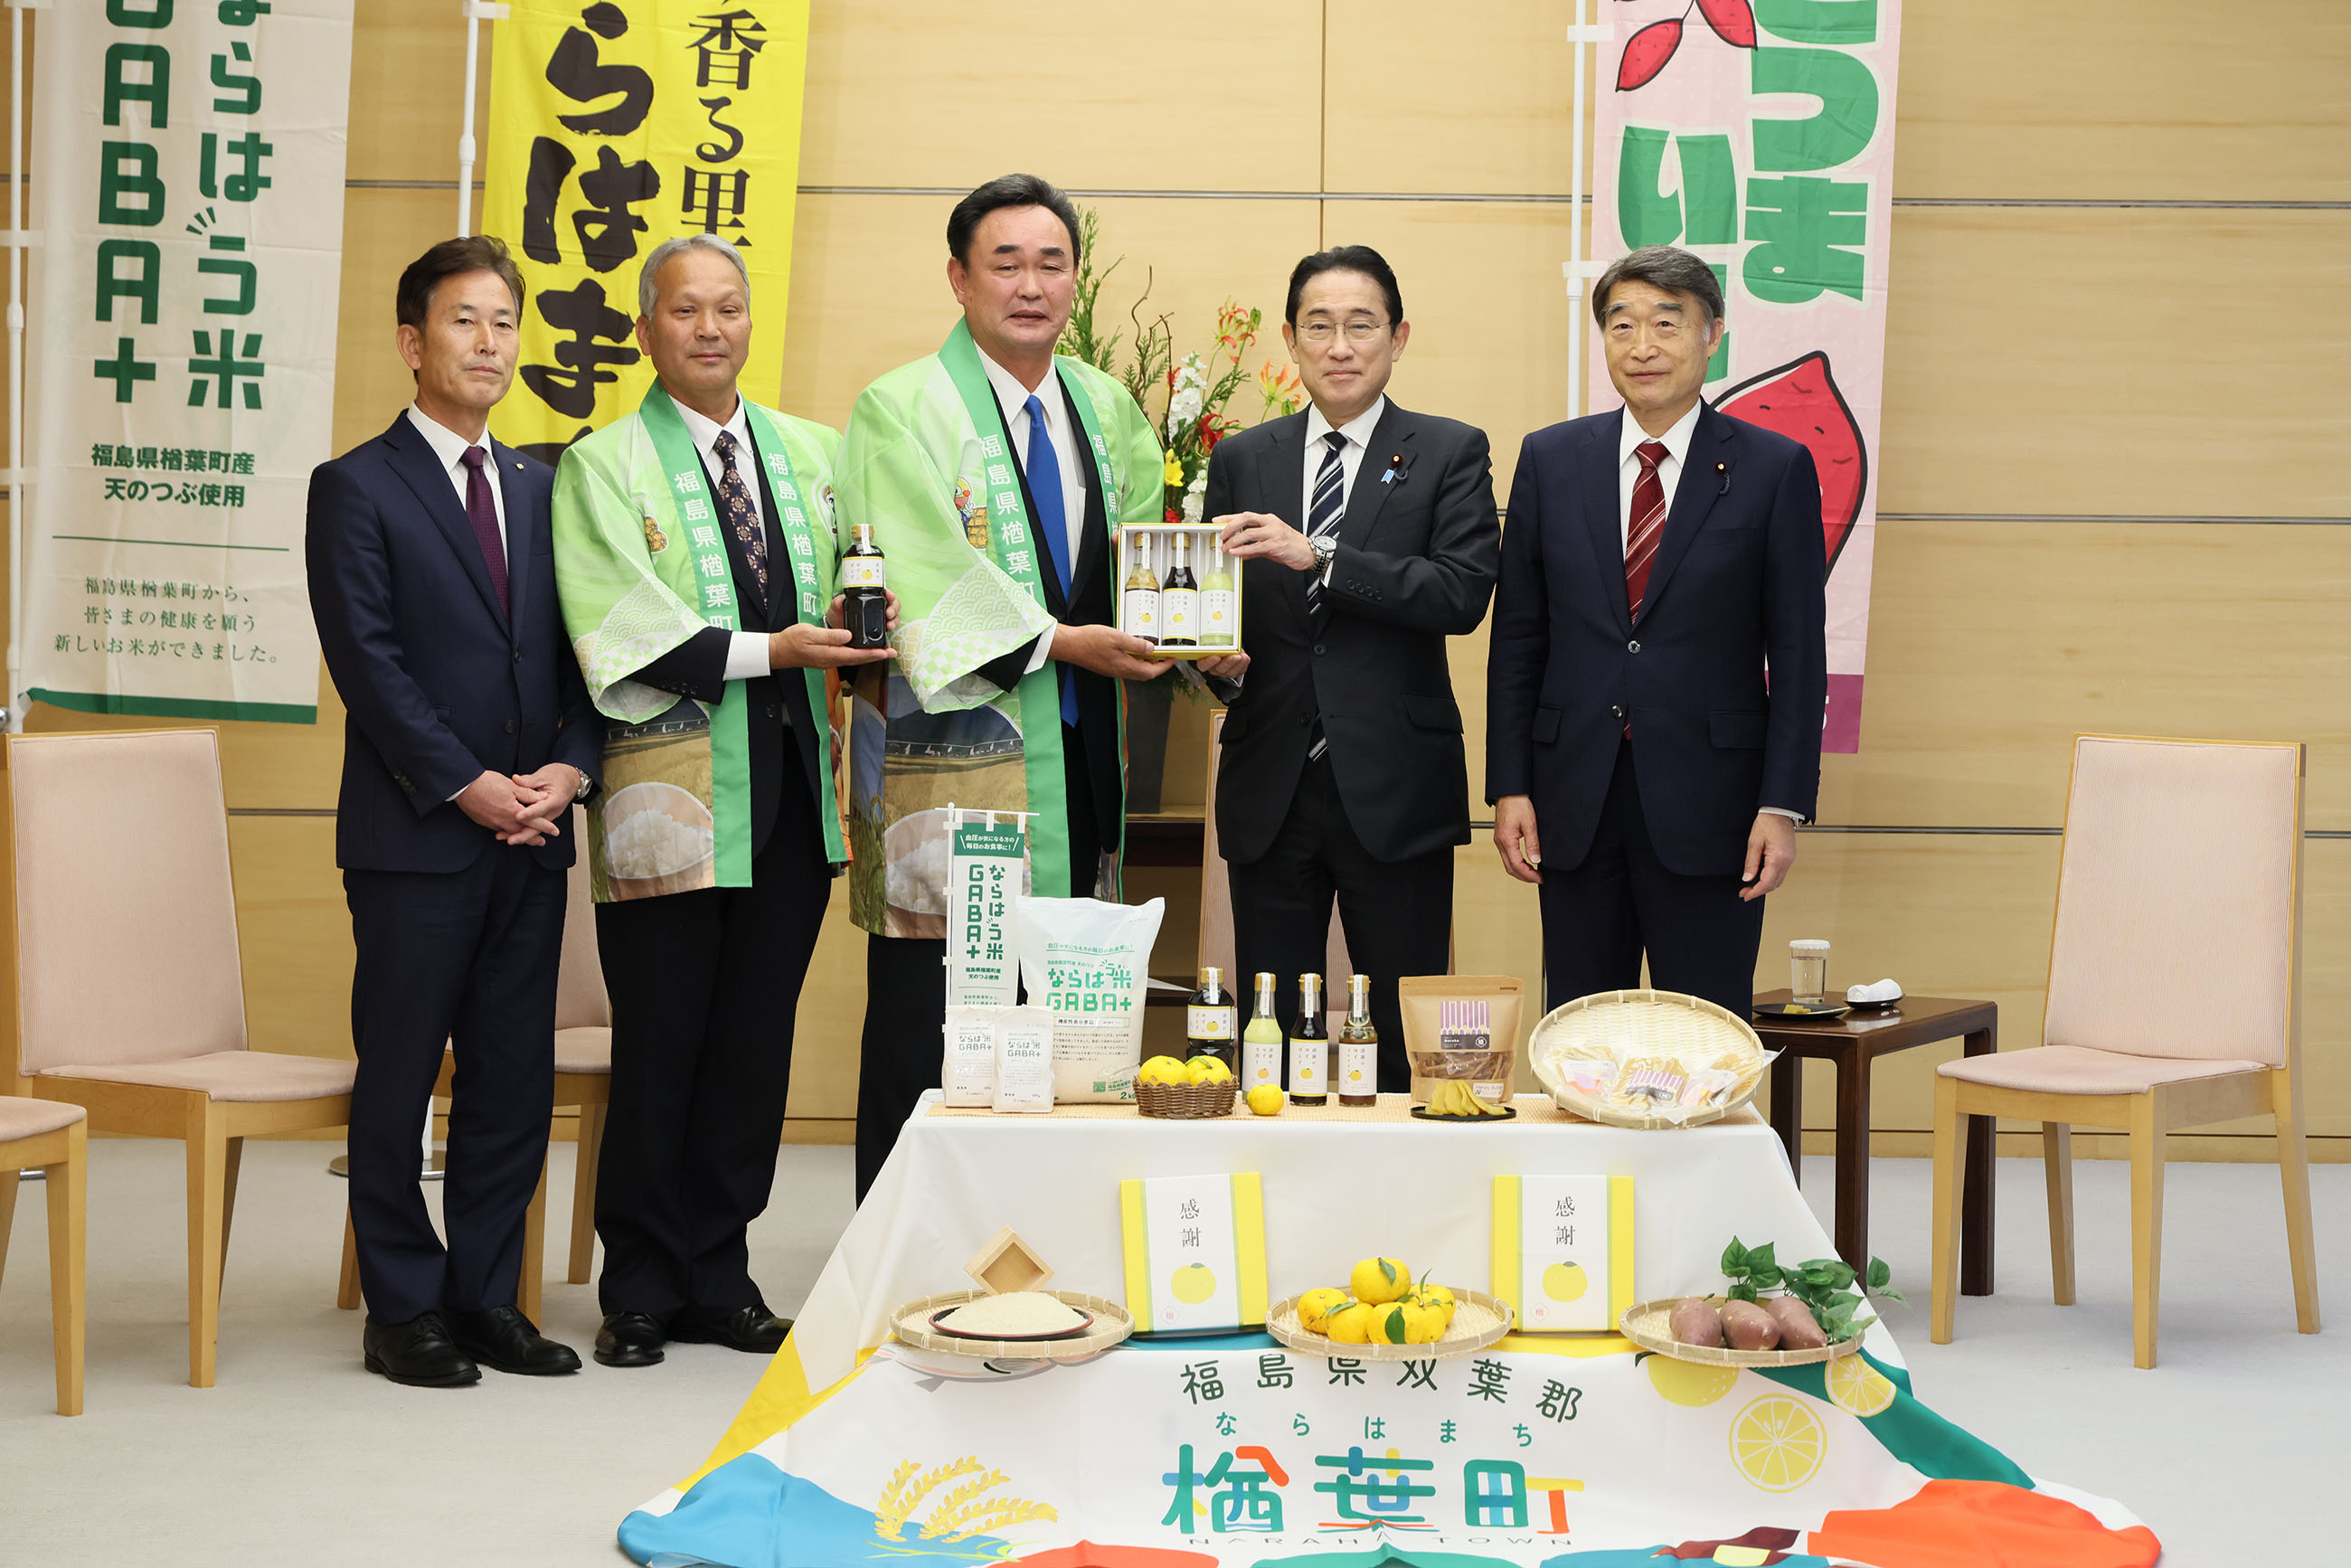 Presentation of Sixth Industry Products by the Mayor of Naraha Town, Fukushima Prefecture